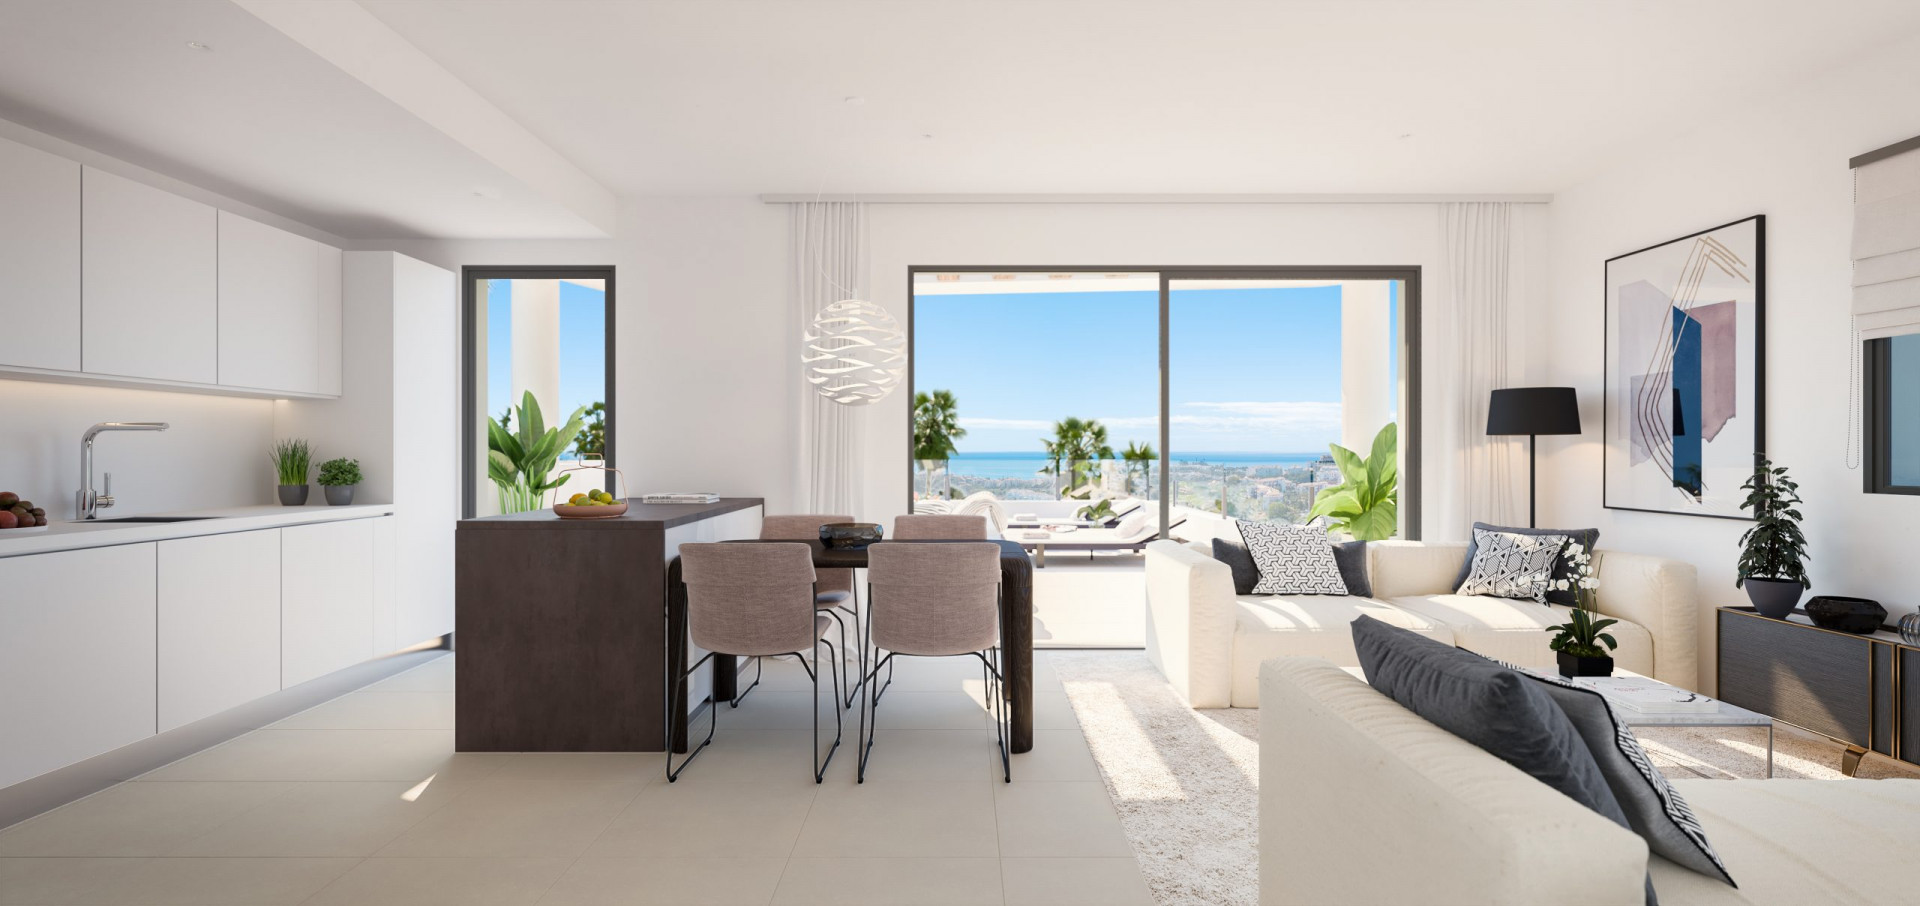 Ipanema: Modern flats and penthouses with privileged location in La Cala de Mijas. | Image 8